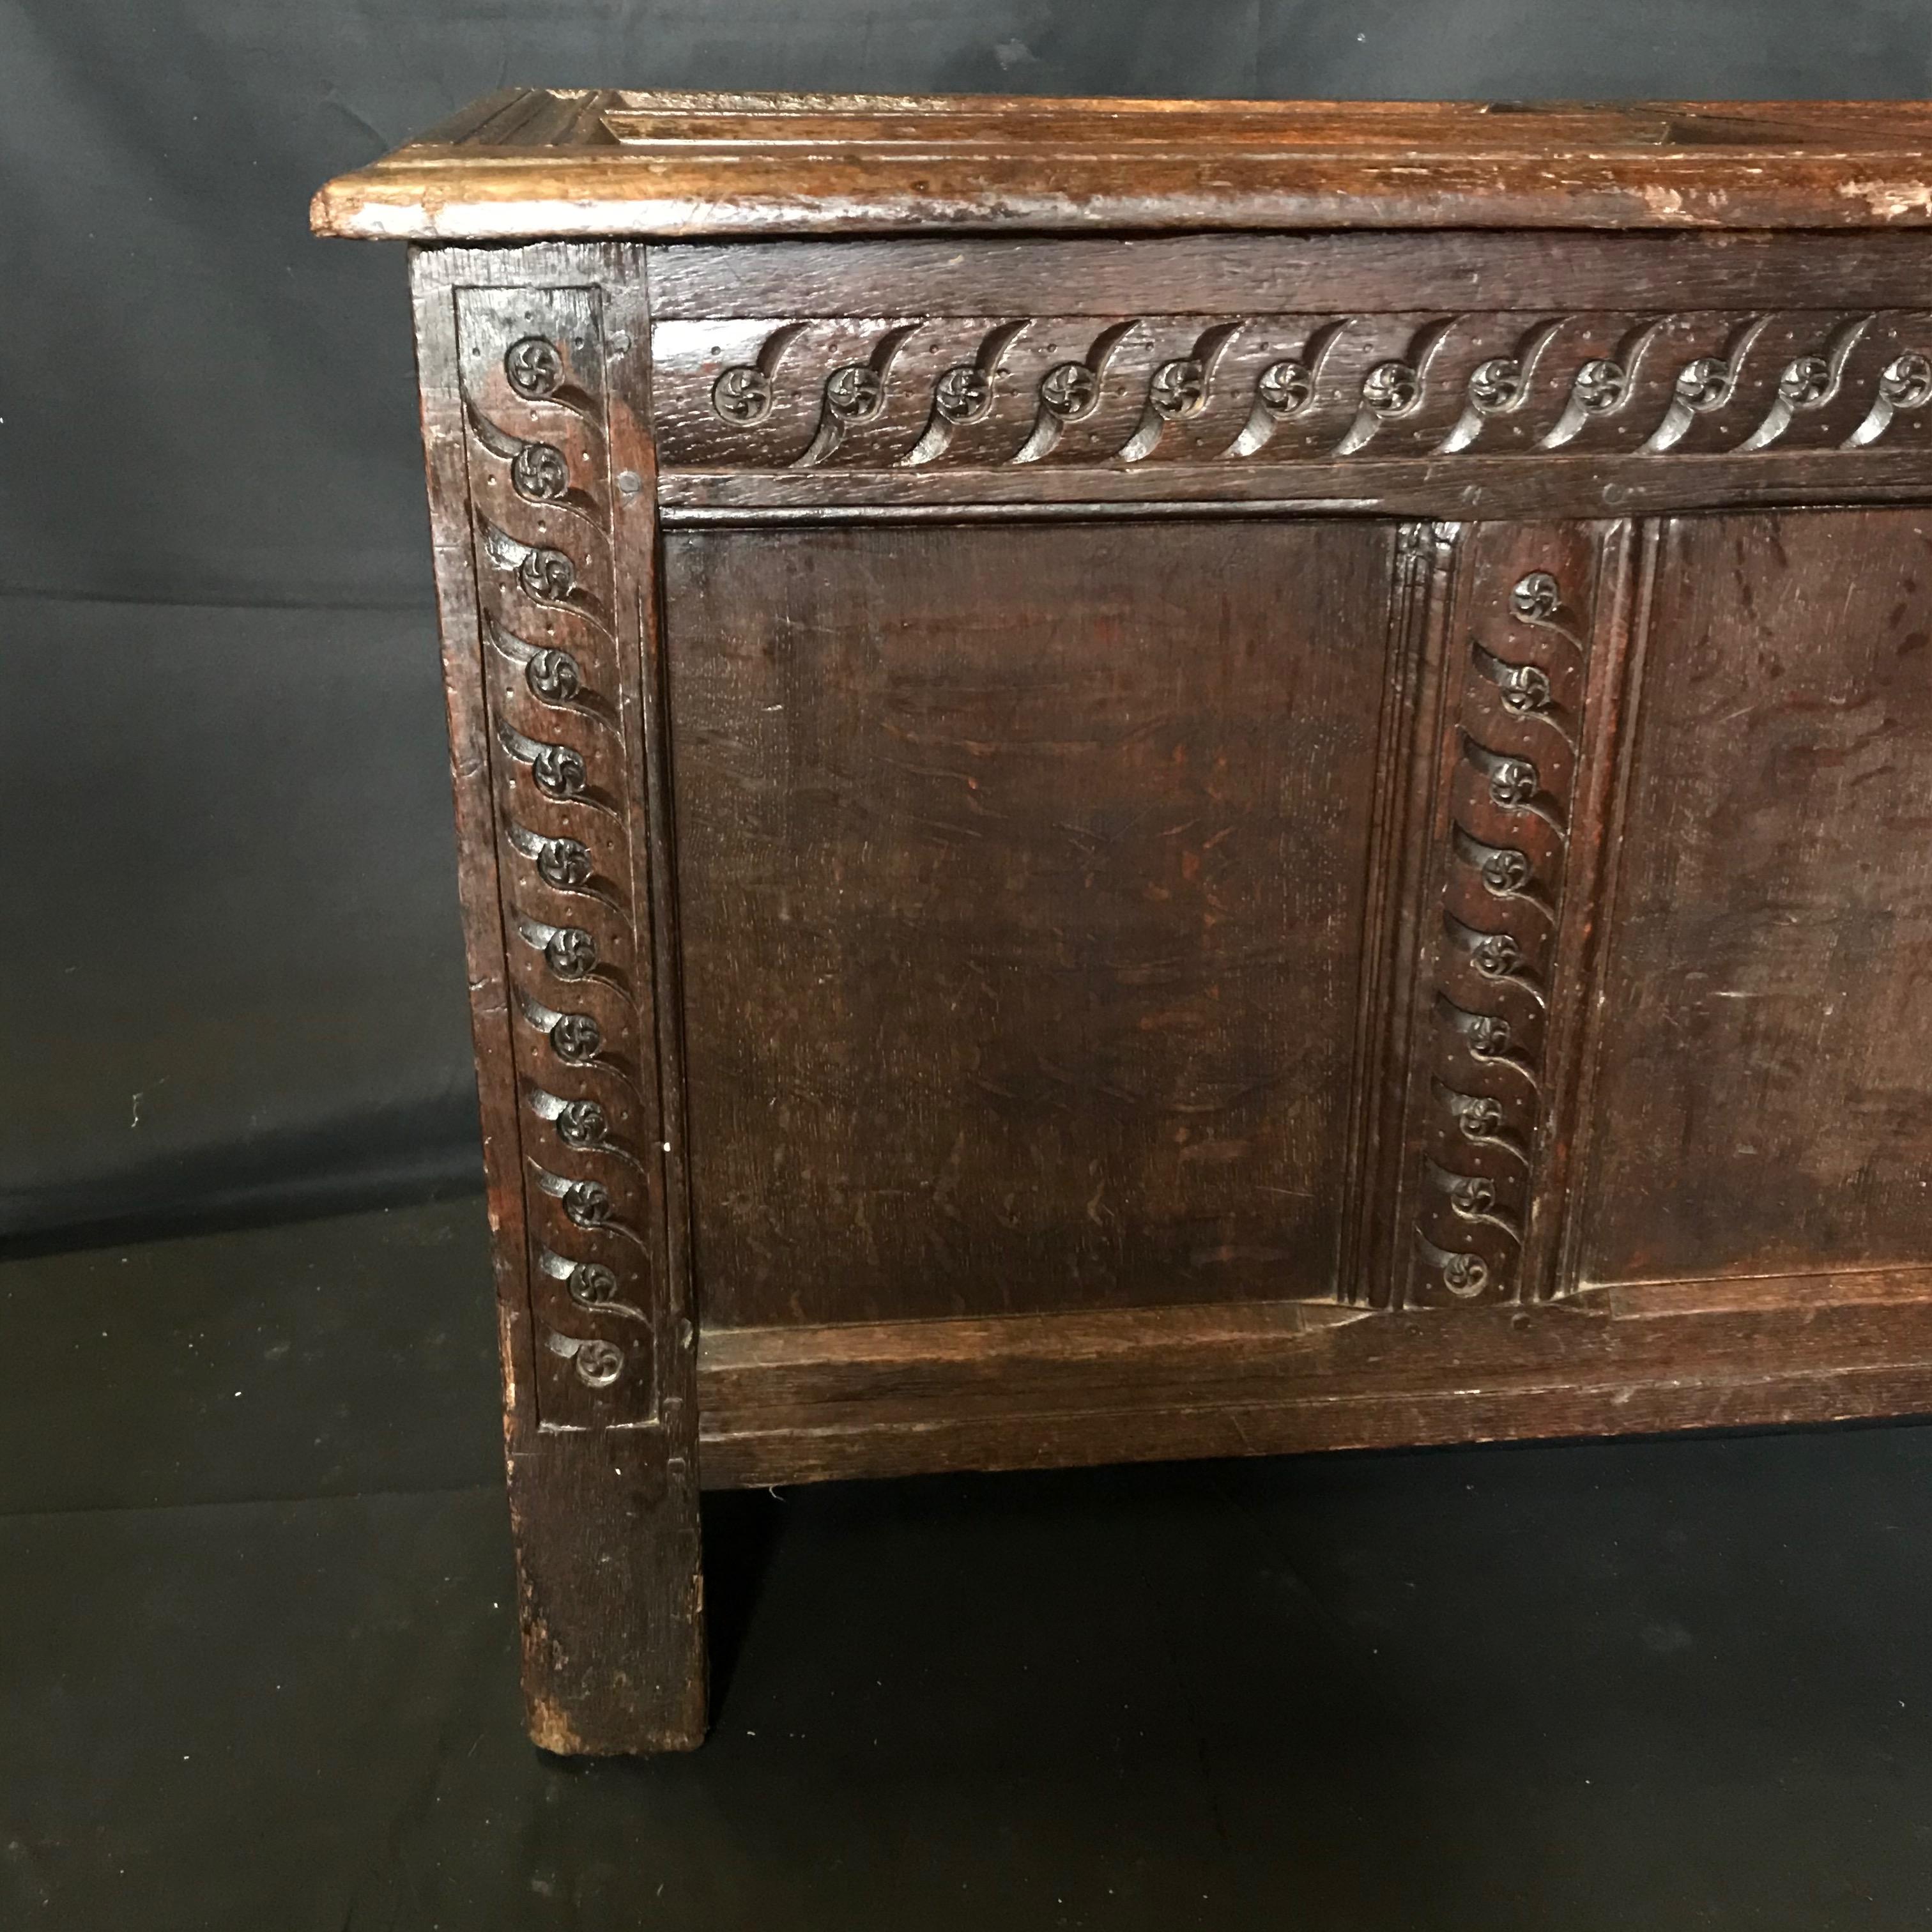 Rare Antique 18th Century Paneled and Carved Scottish Coffer Chest For Sale 7